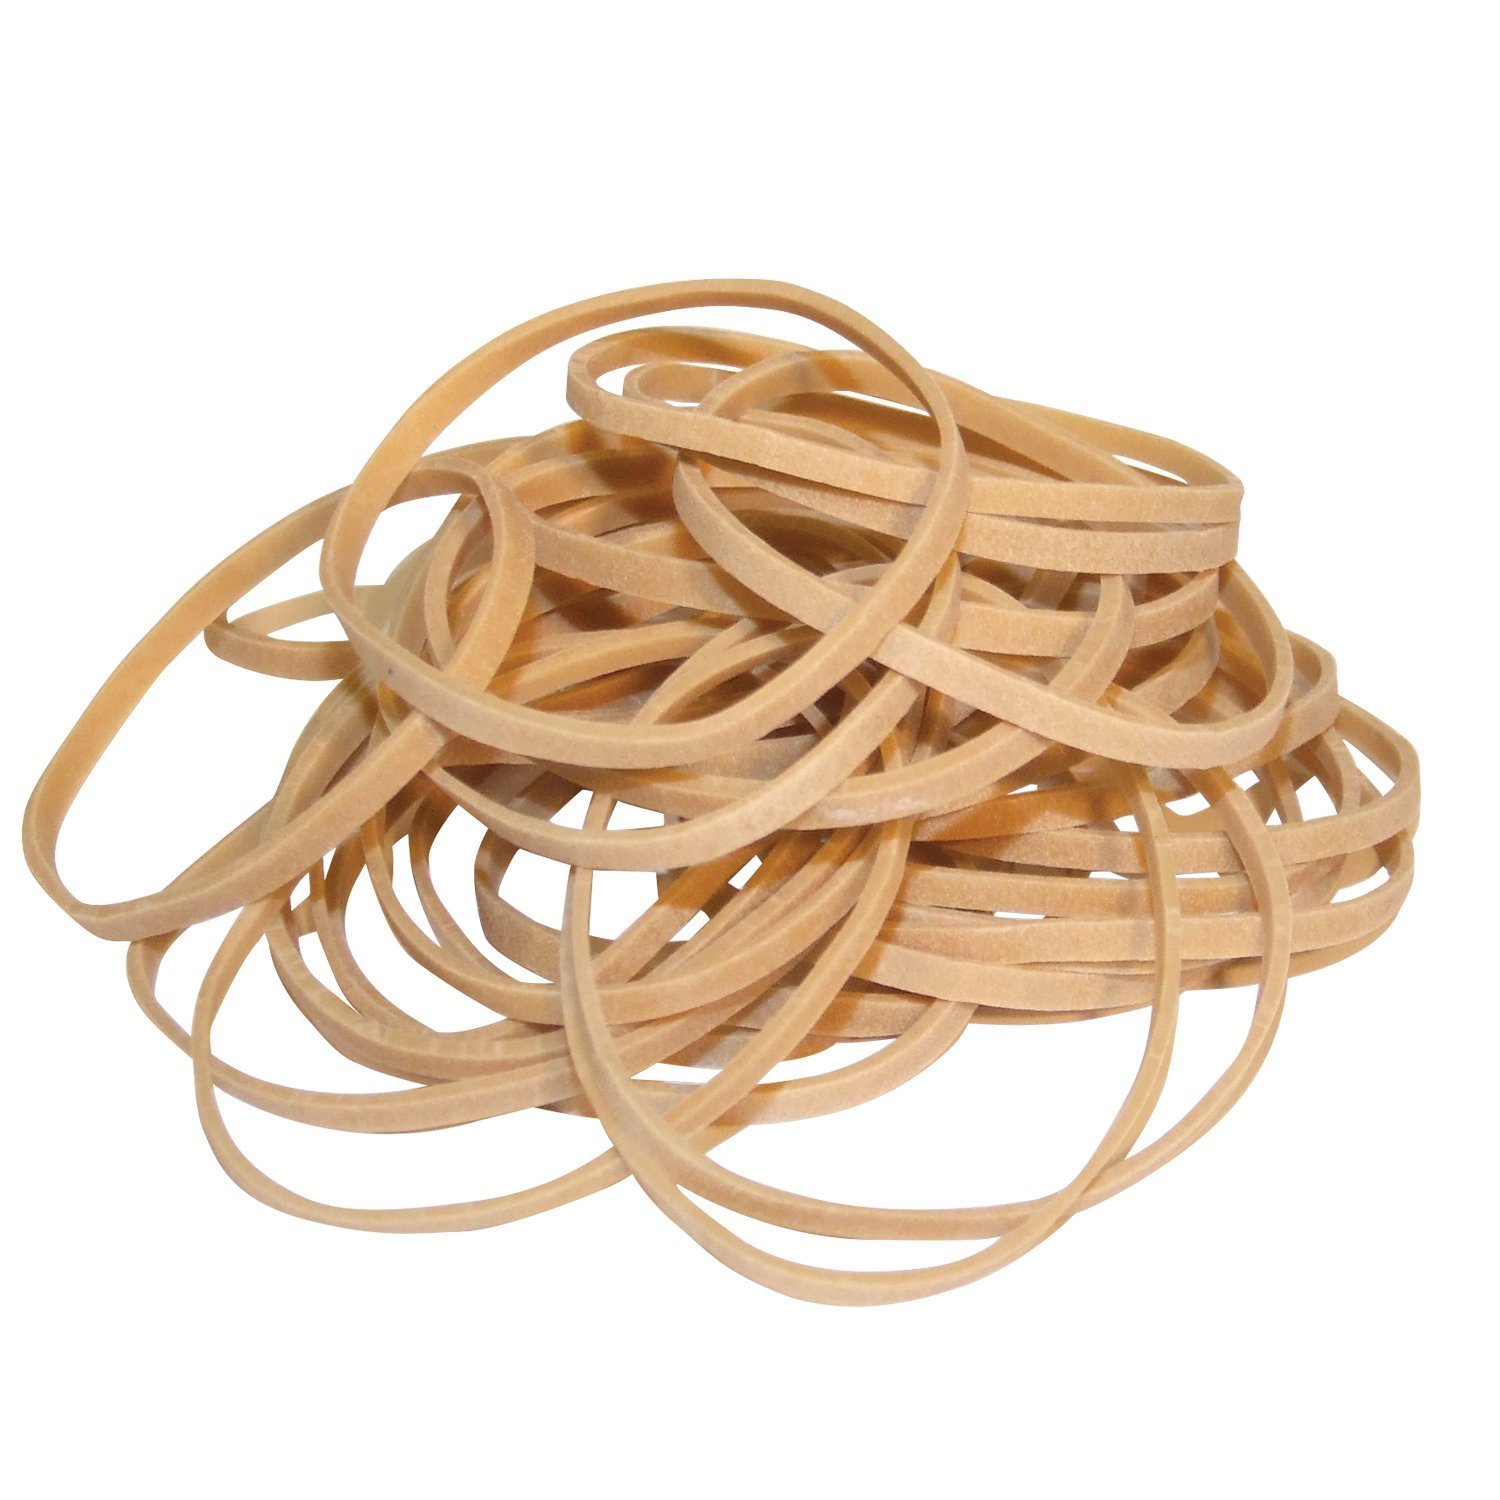 Rubber Bands ValueX Rubber Elastic Band No 64 6x90mm 454g Natural